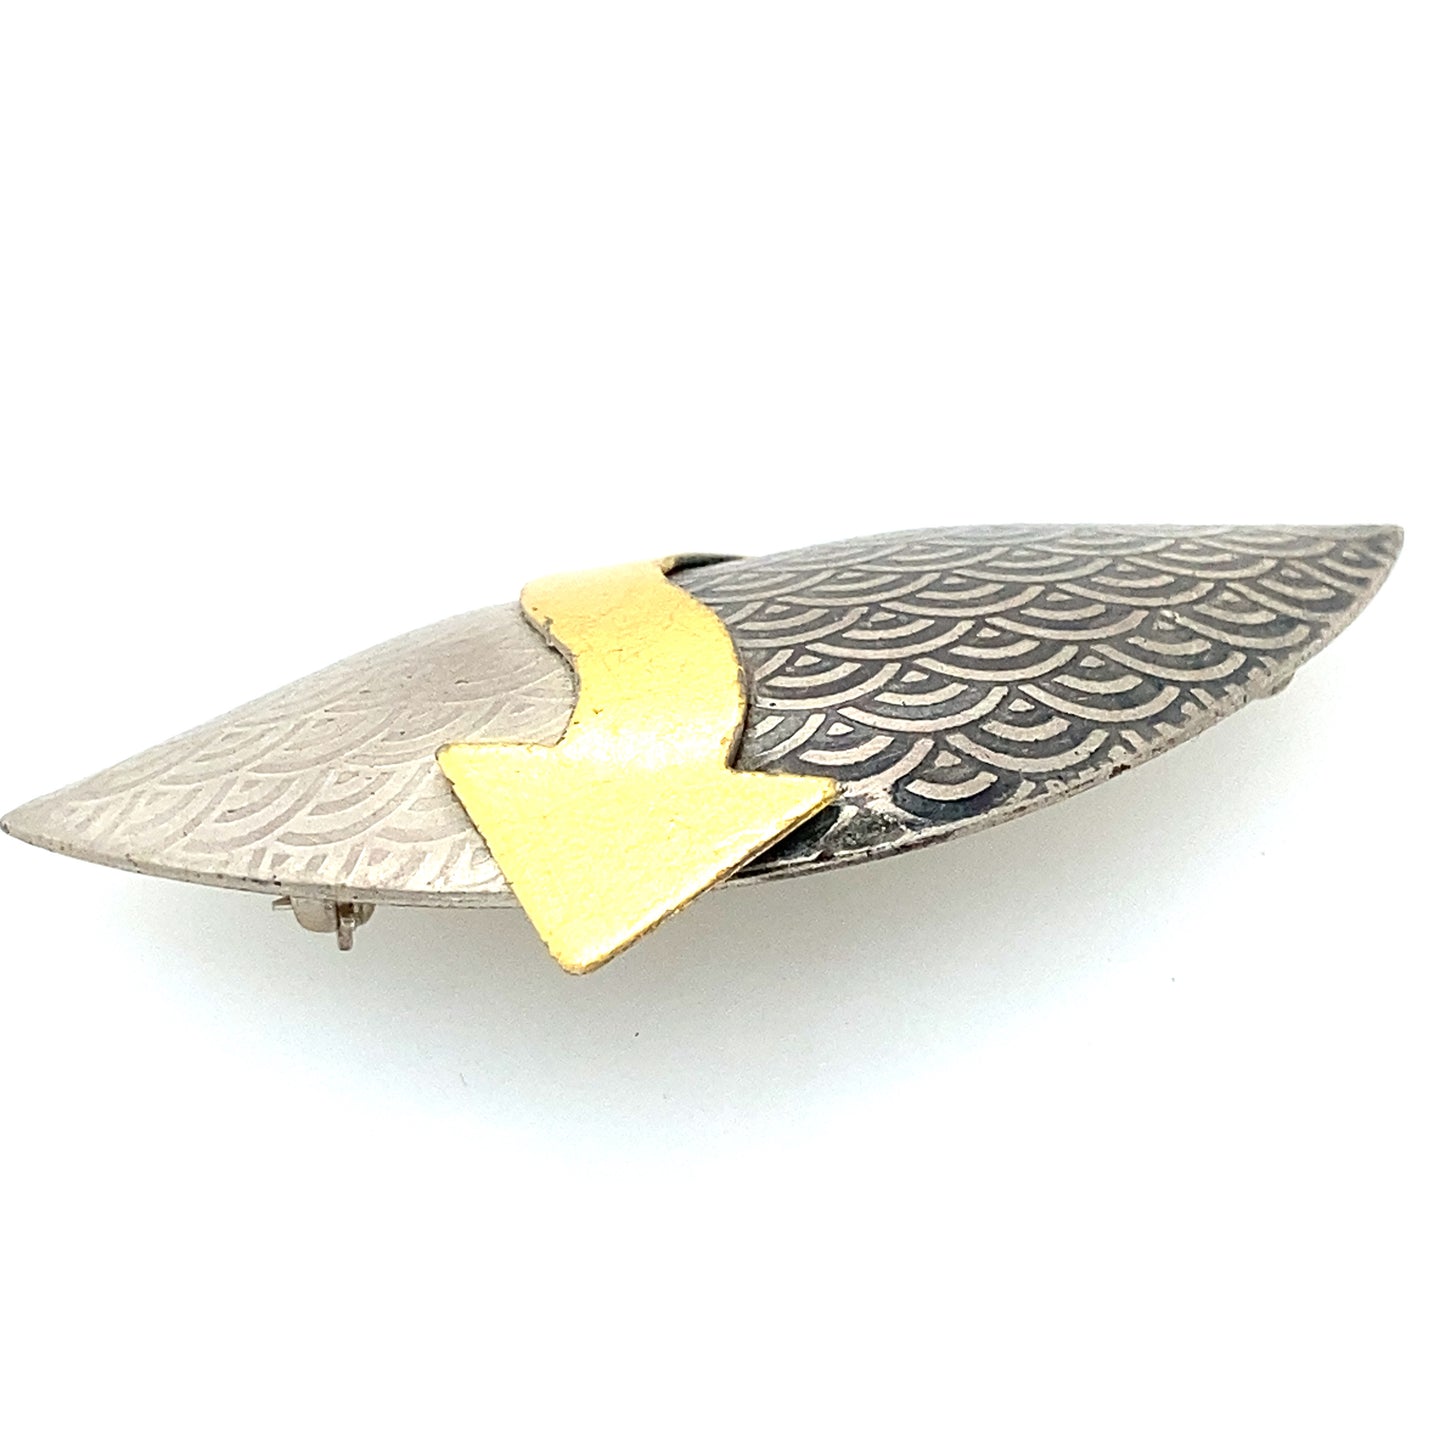 Designer brooch Sterling Silver design with 22k yellow gold.